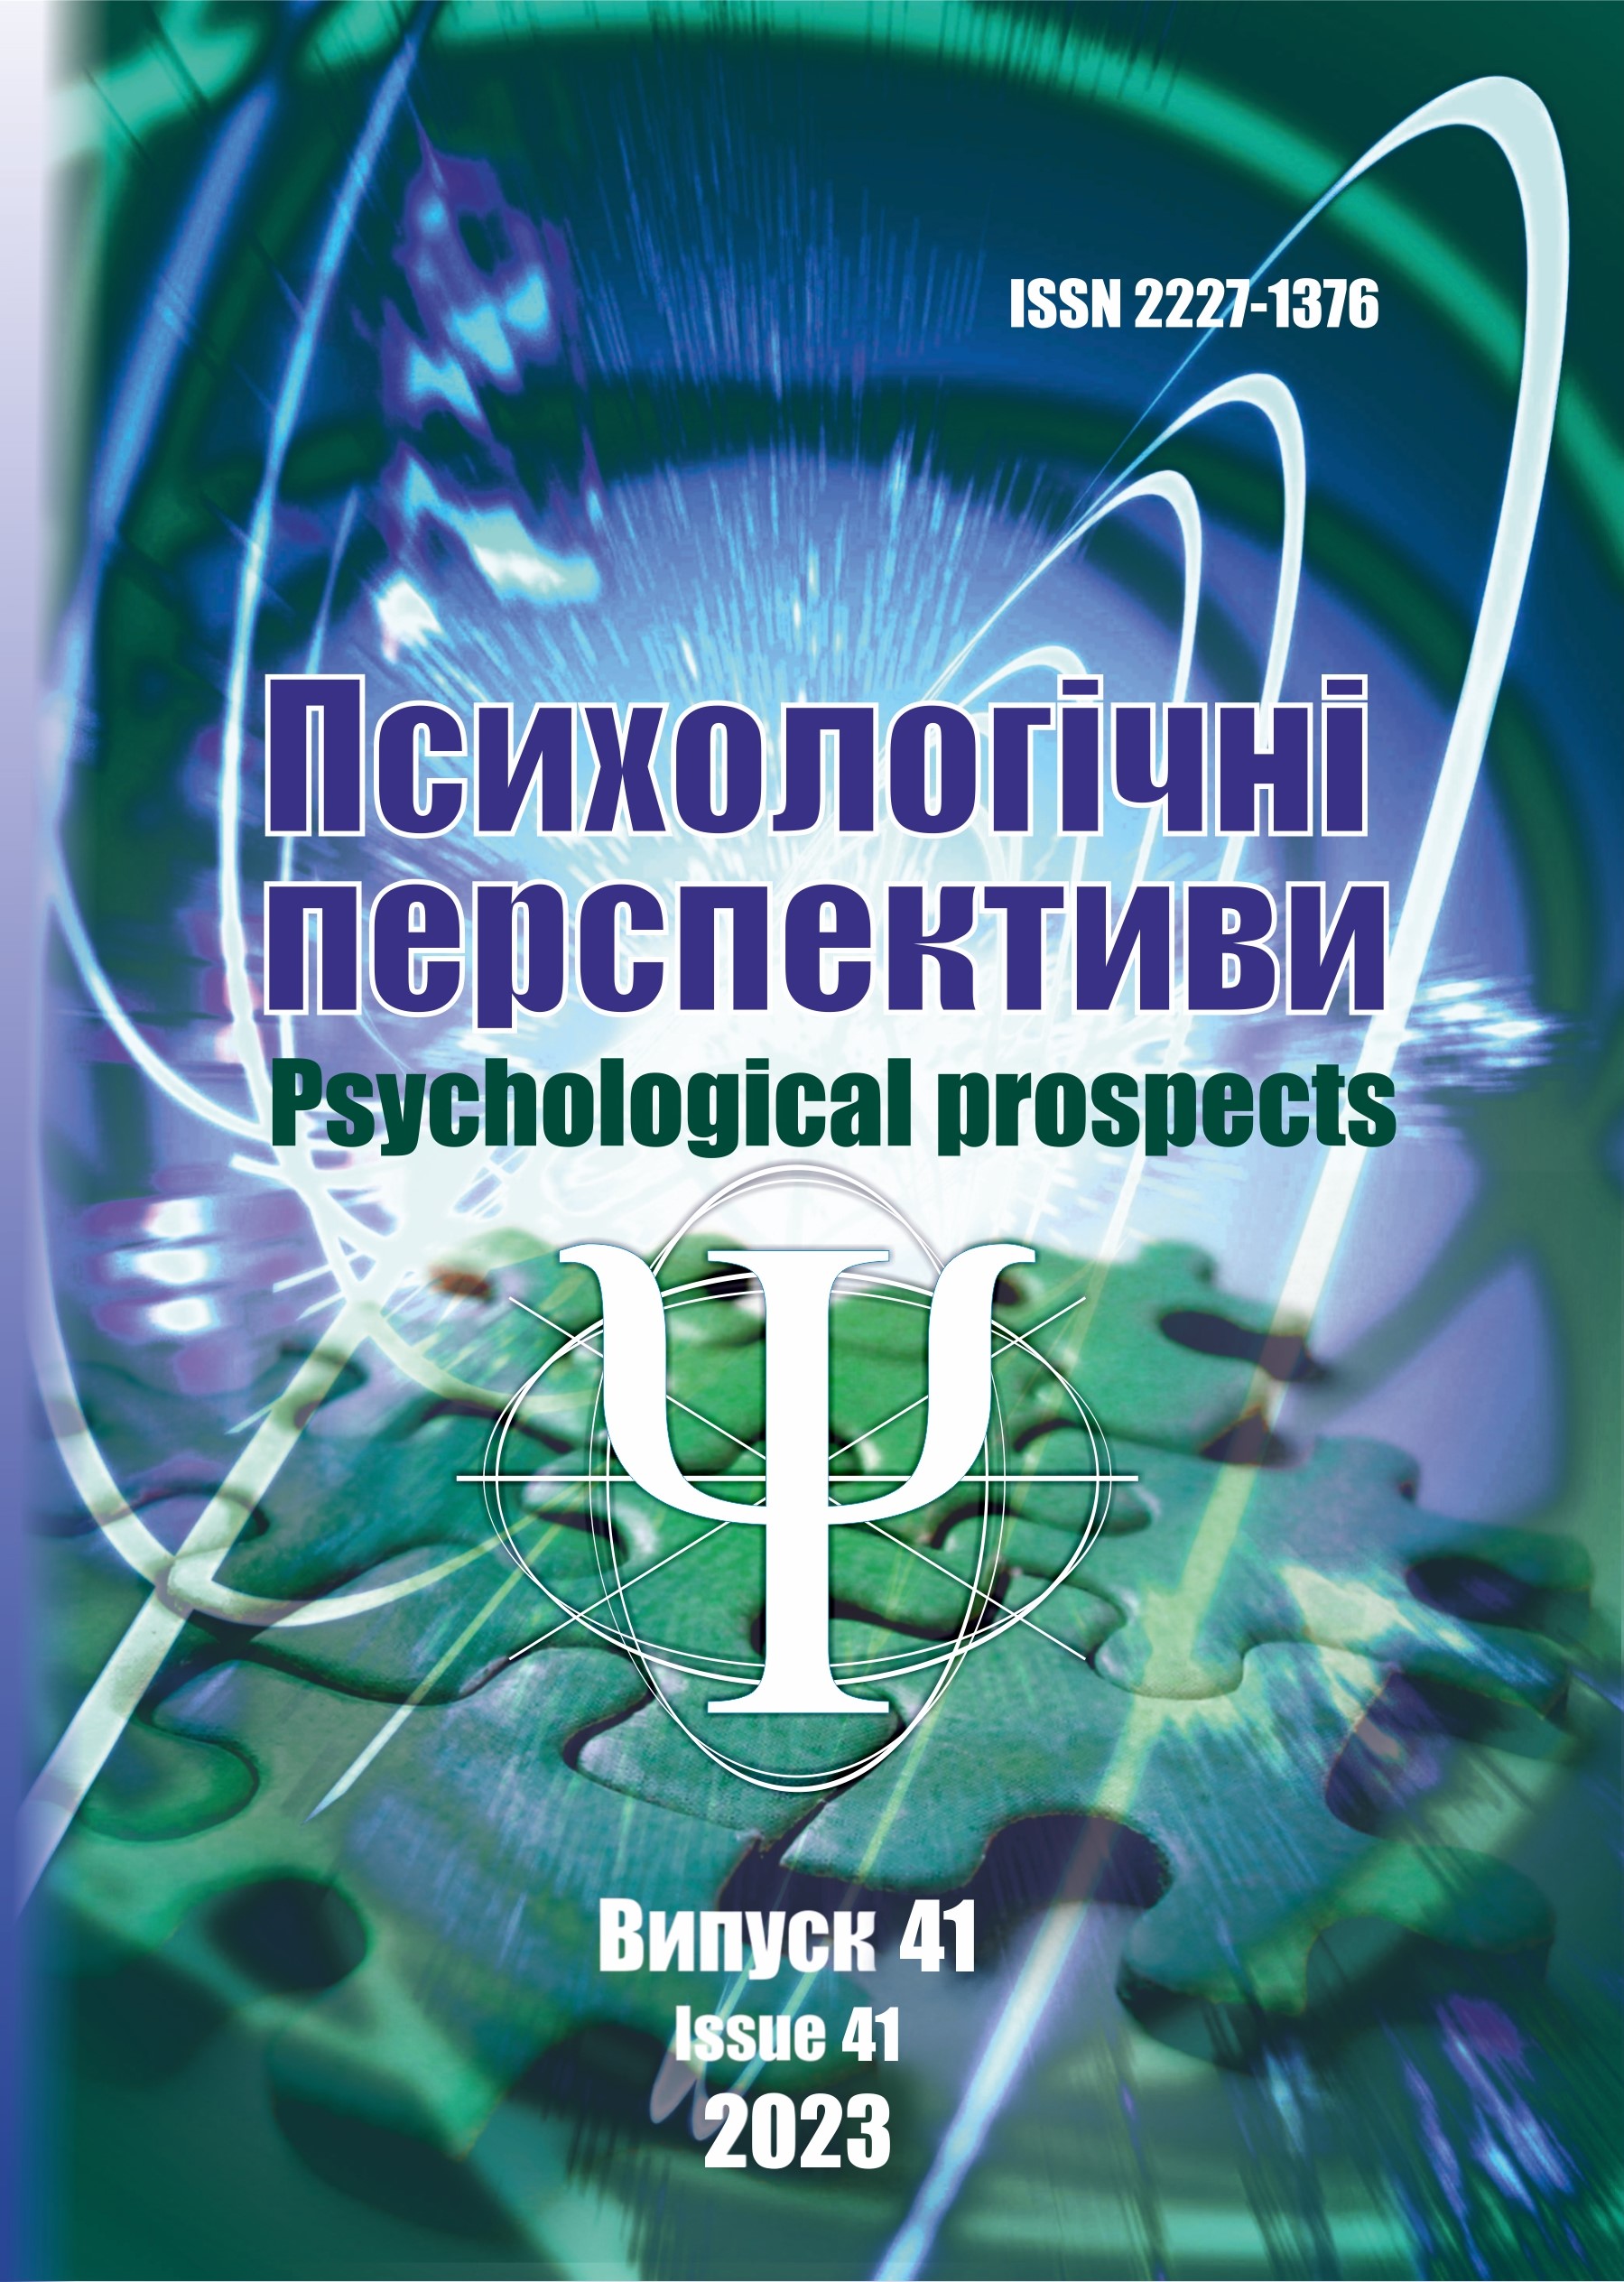 					View No. 41 (2023): Psychological Prospects Journal
				